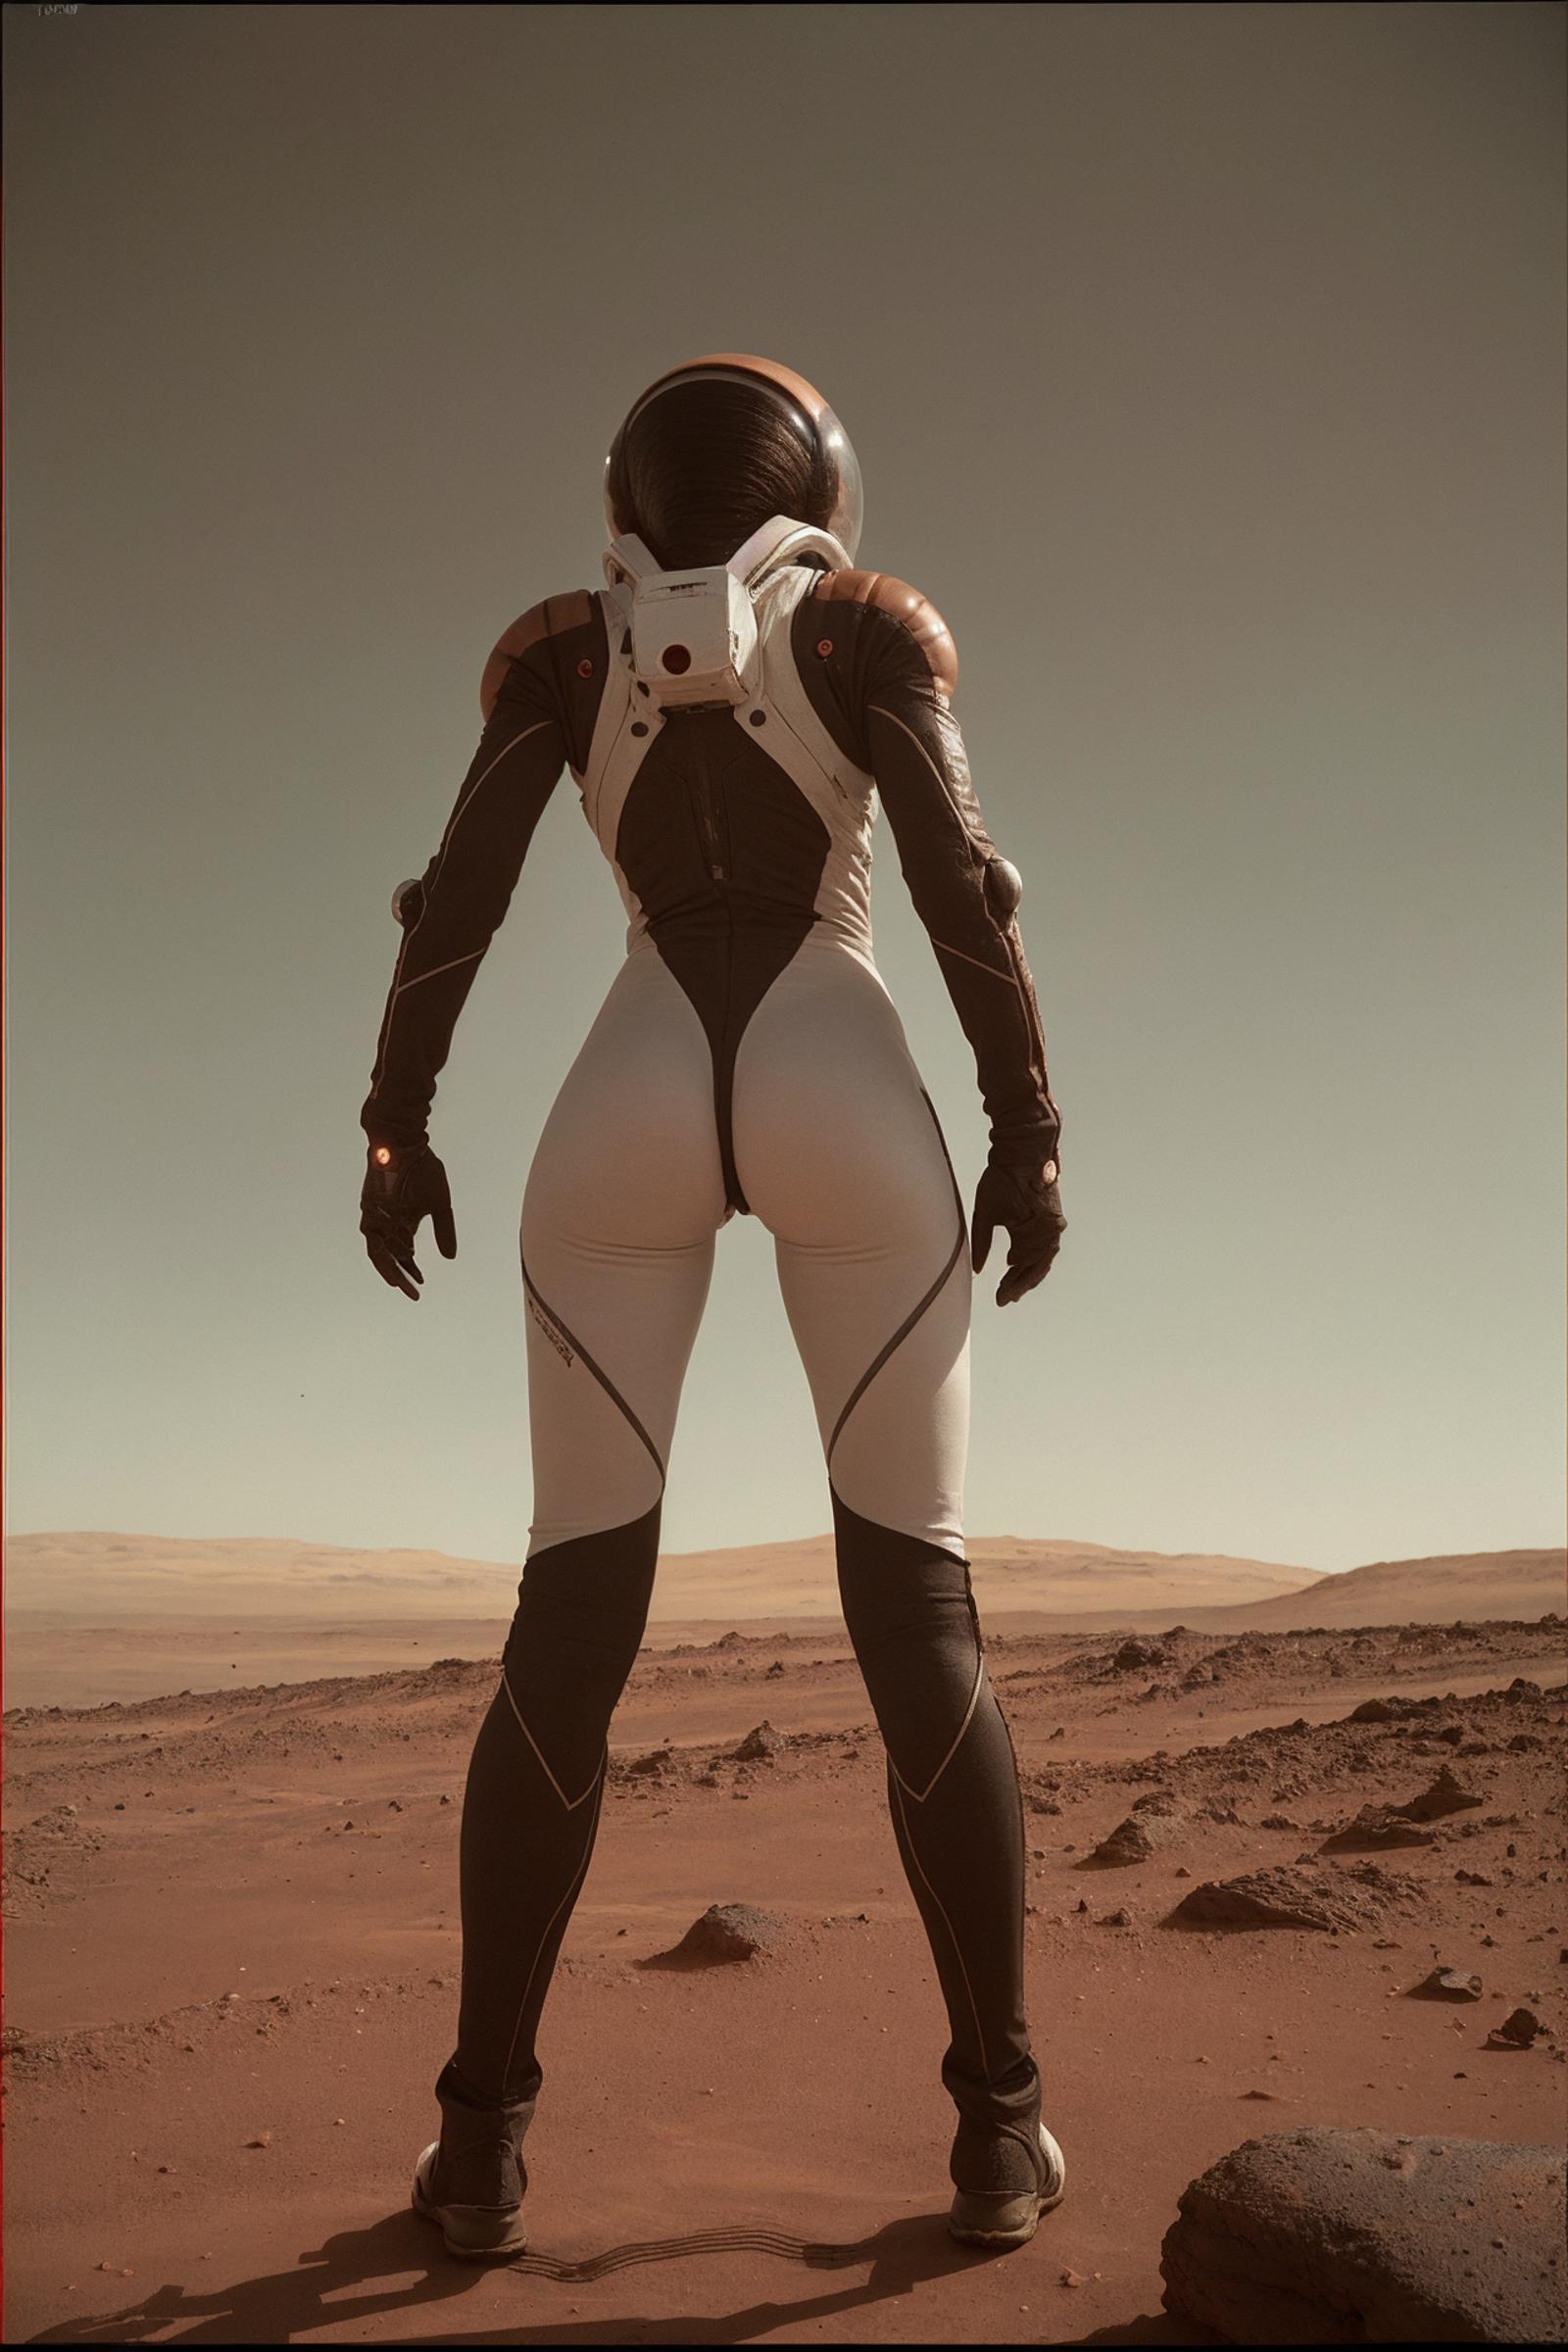 Astronaut in a white spacesuit walking on Mars.